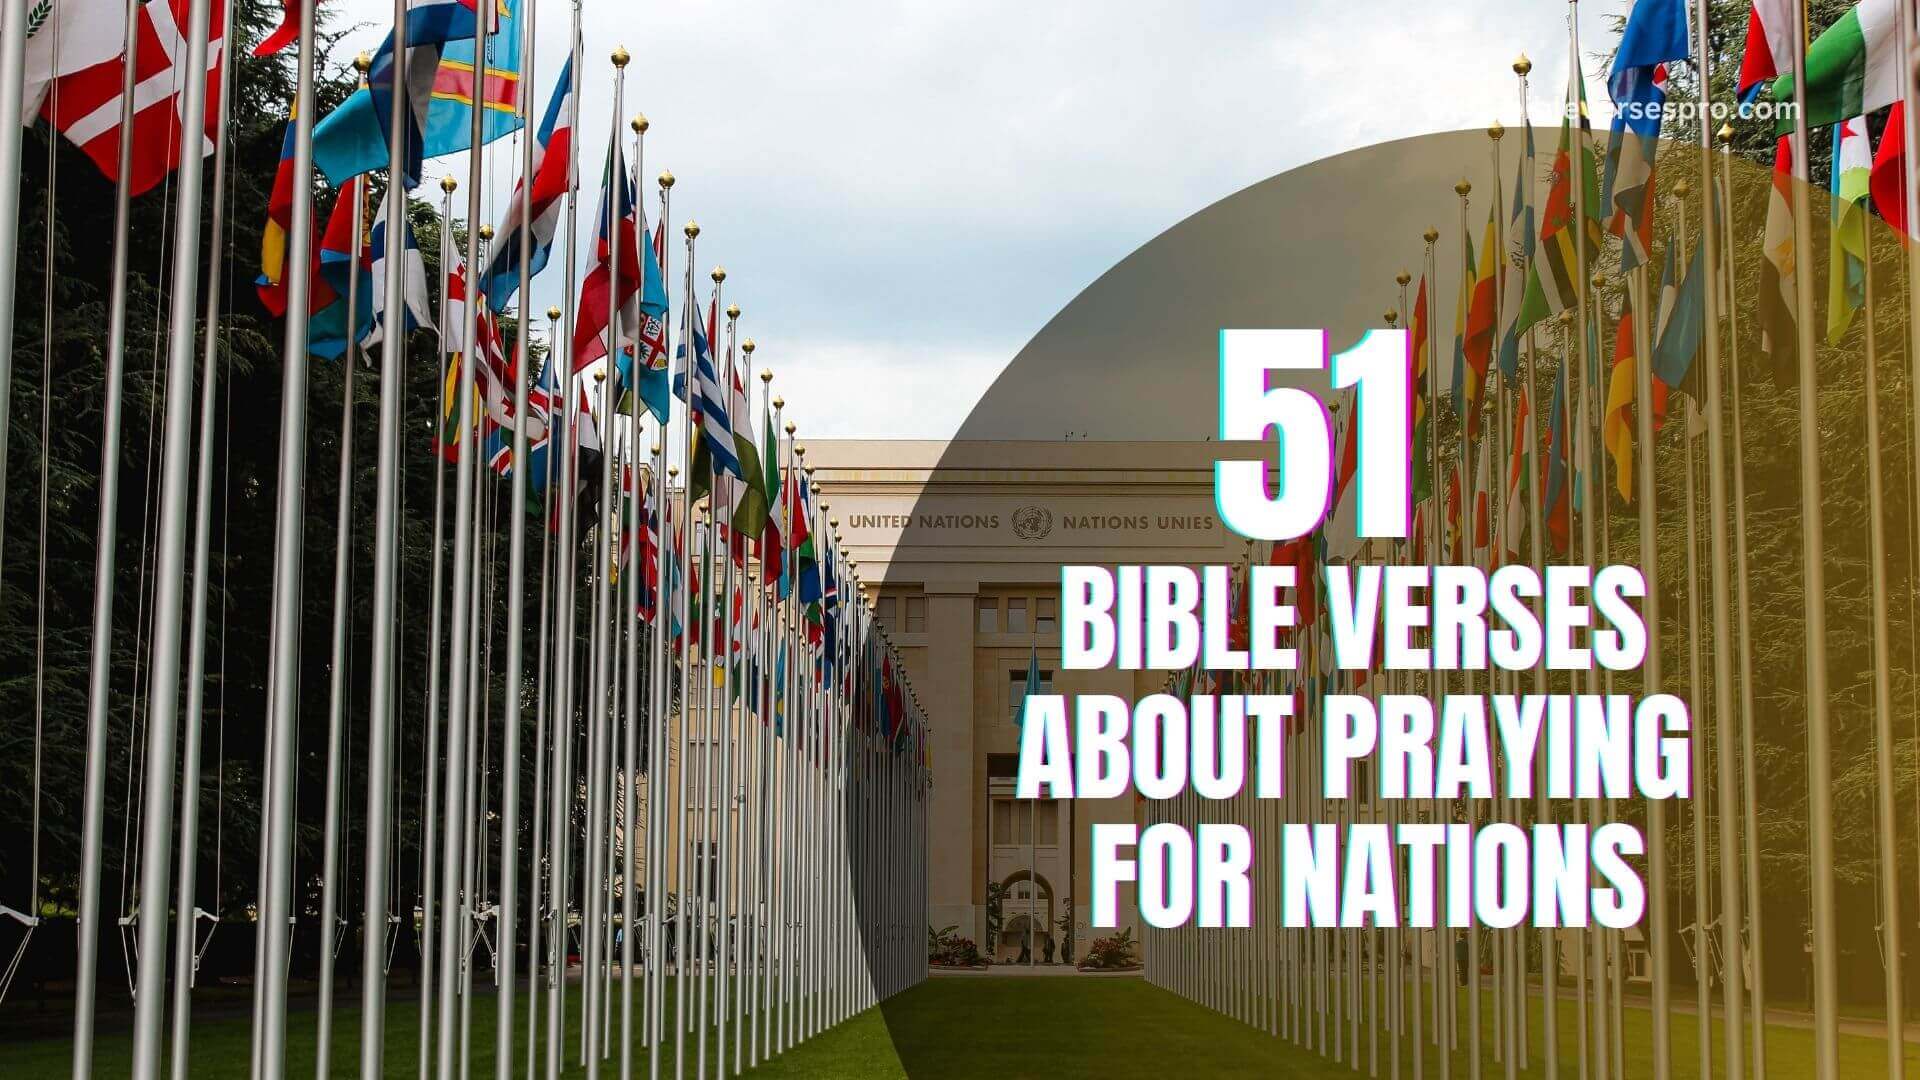 Bible Verses About Praying For Nations (1) (2)